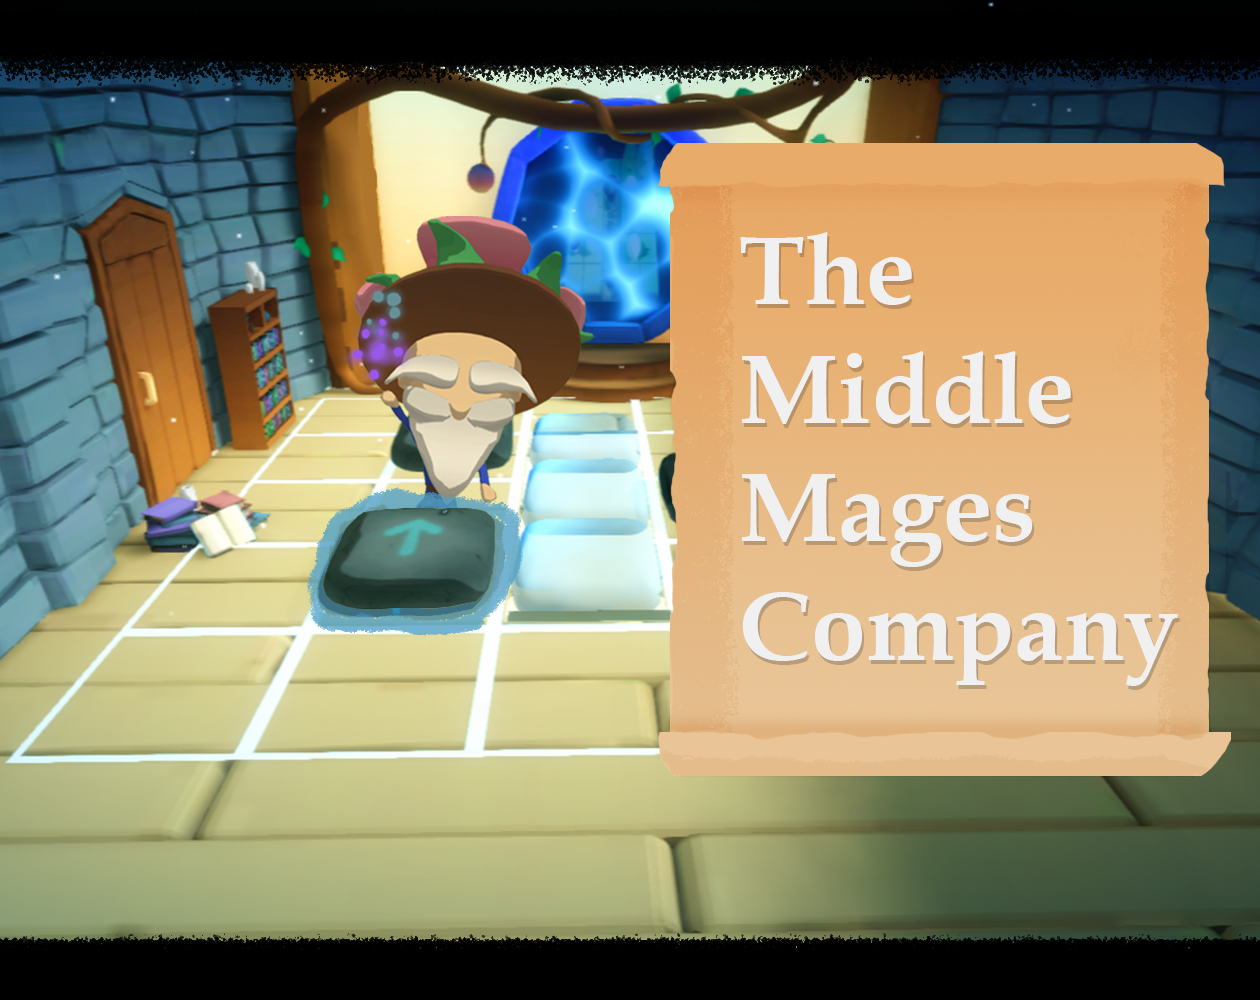 The Middle Mages Company